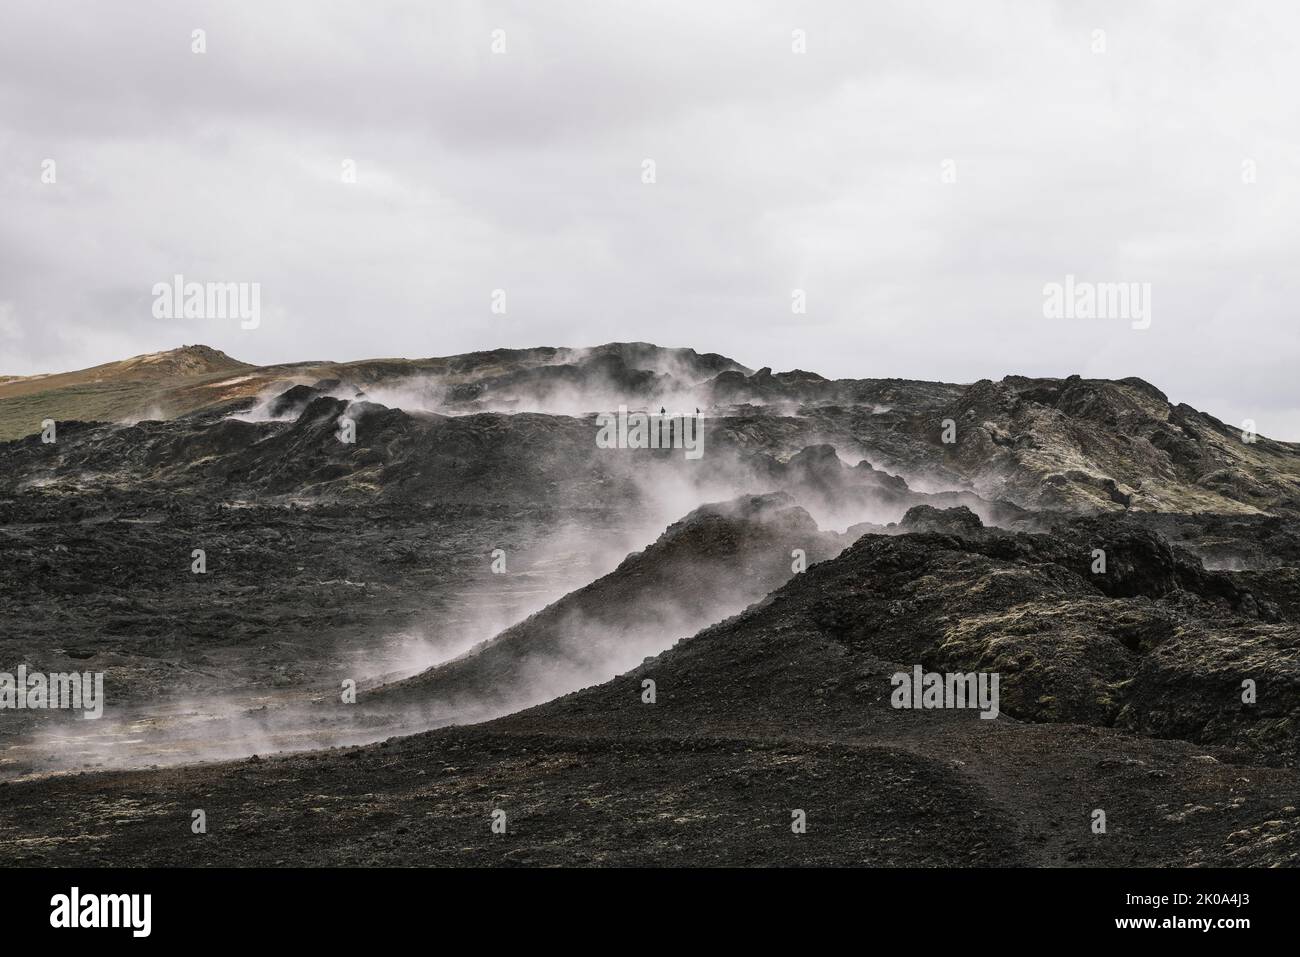 Leirhnjukur geothermal area, Lava fields after a volcanic eruption, Iceland Stock Photo